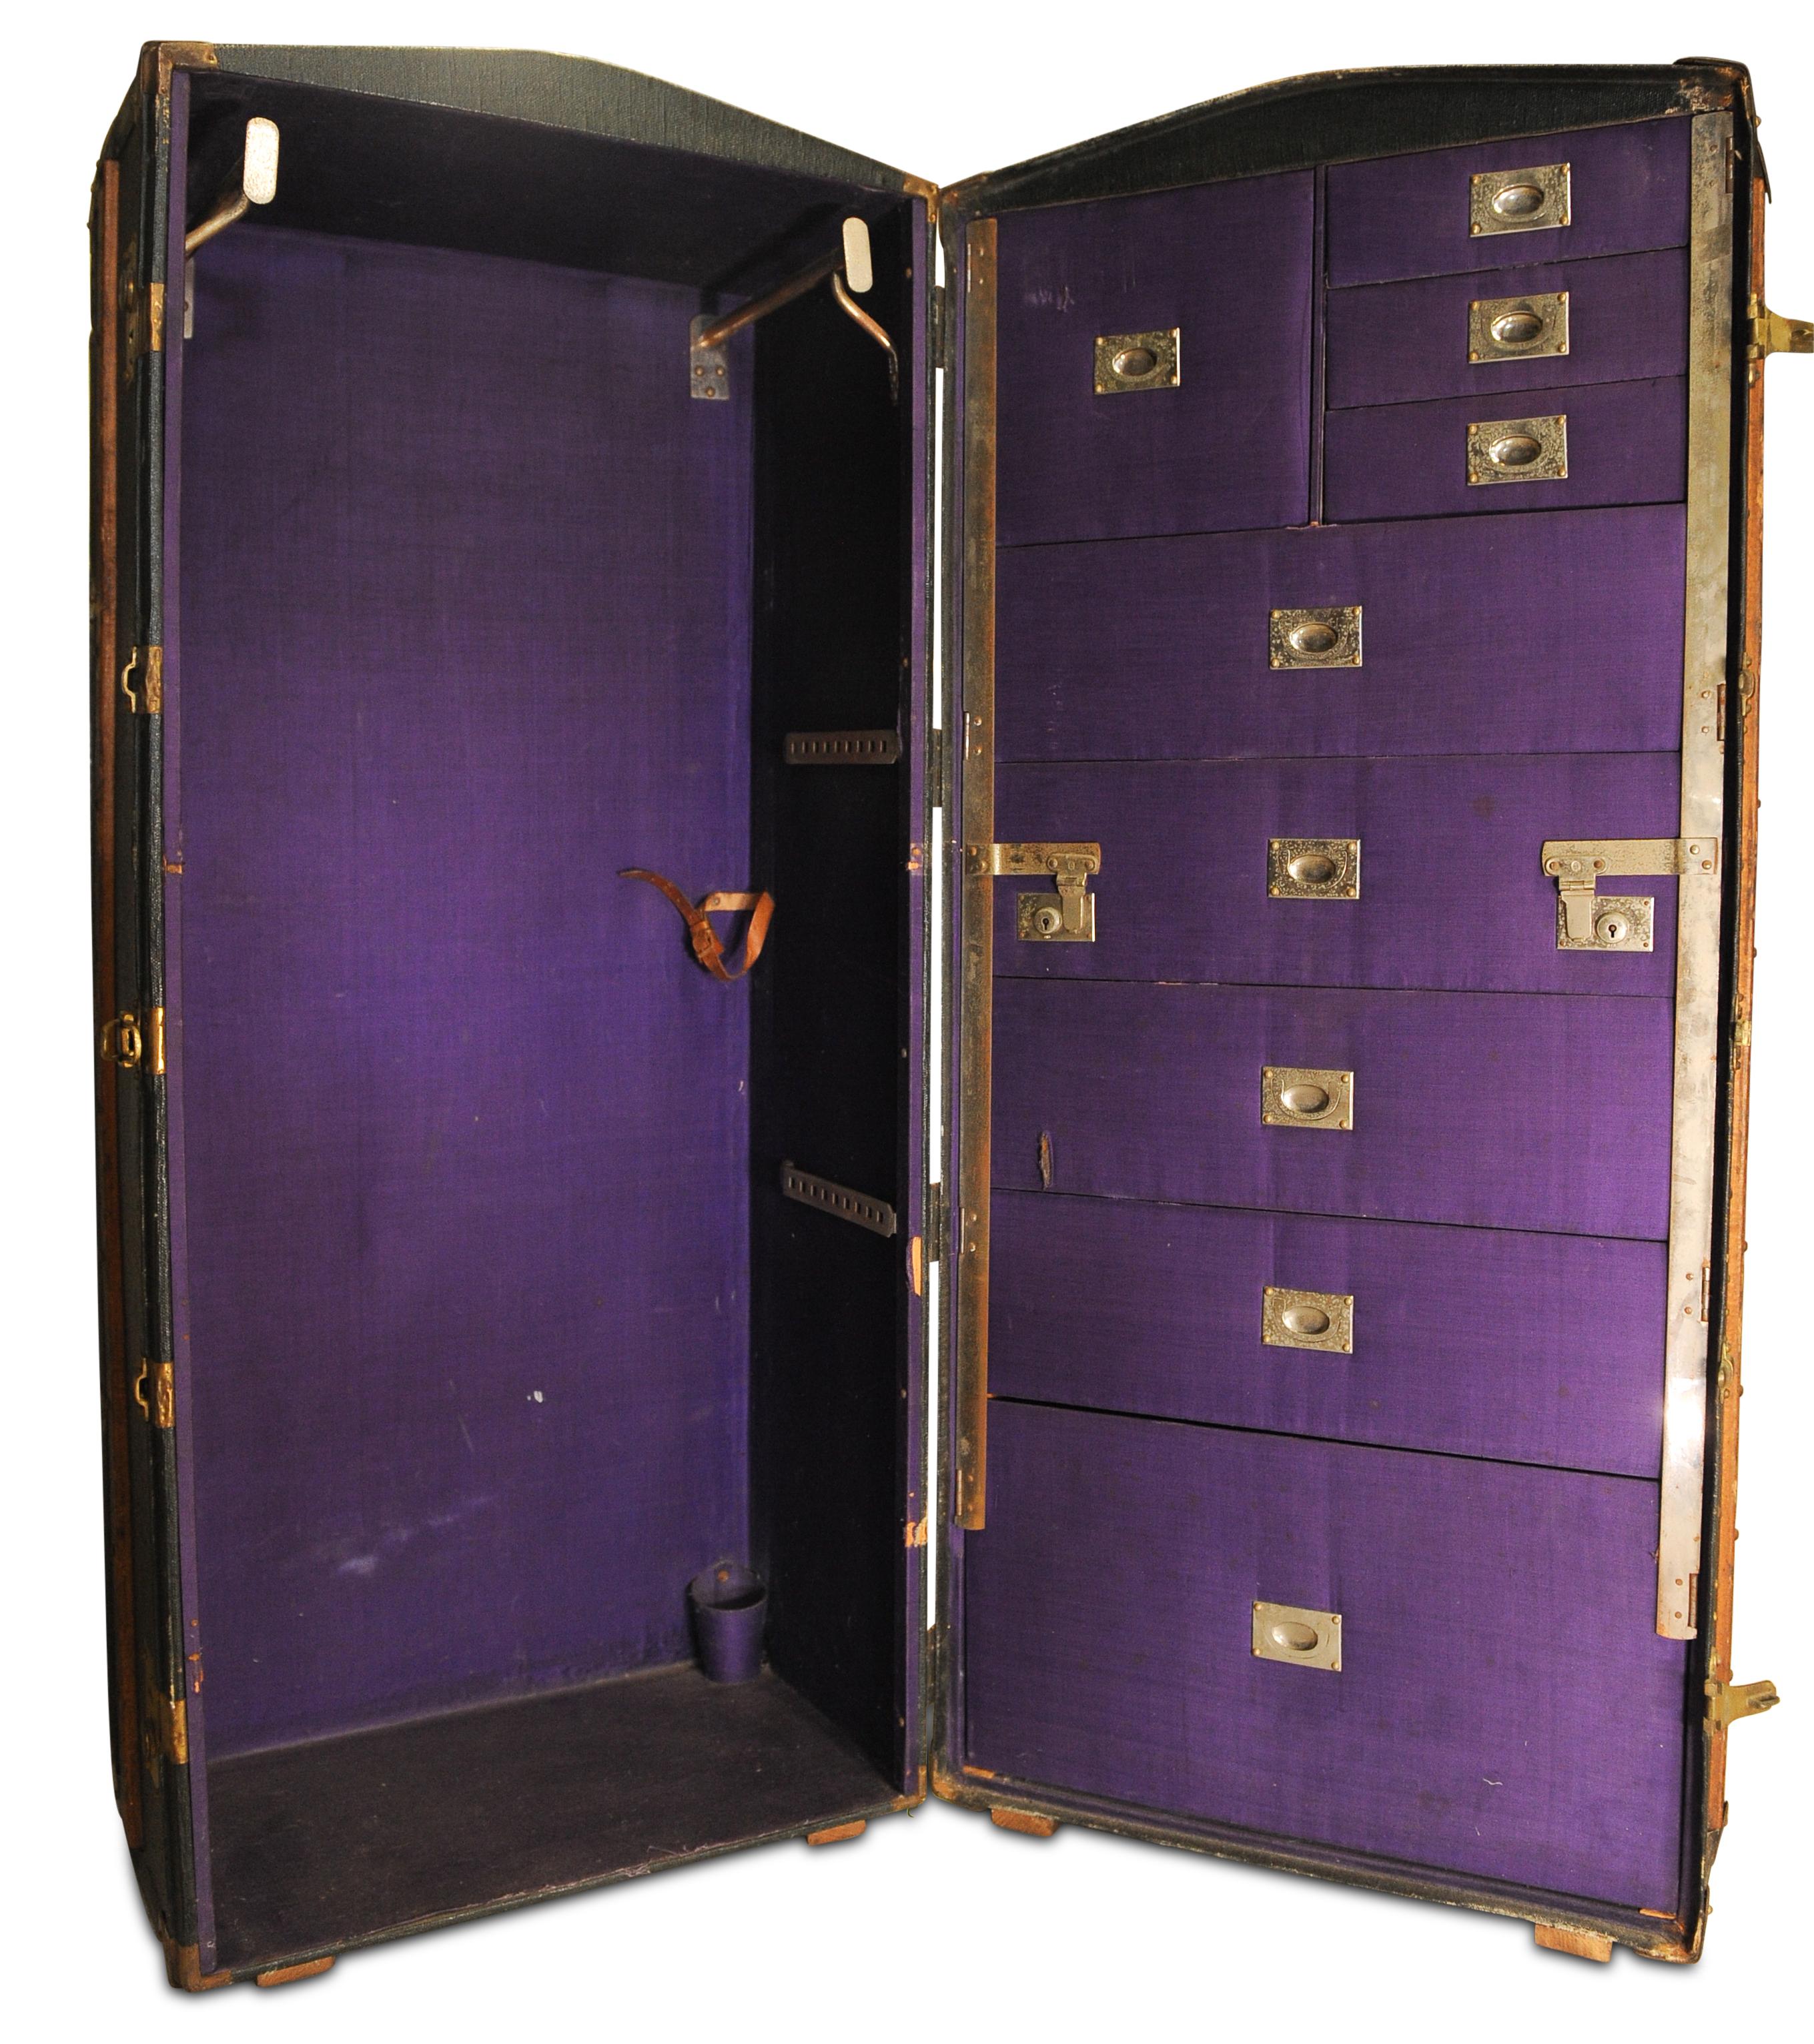 A Well Preserved British 2nd World War Military Campaign Steamer Trunk. Owner Major RM McGregor. Medical Corps
27 Bridge Street Hawick
At No 27 is the long-established Deans Chartered Accountants, formerly the premises of Waverley Housing. In the